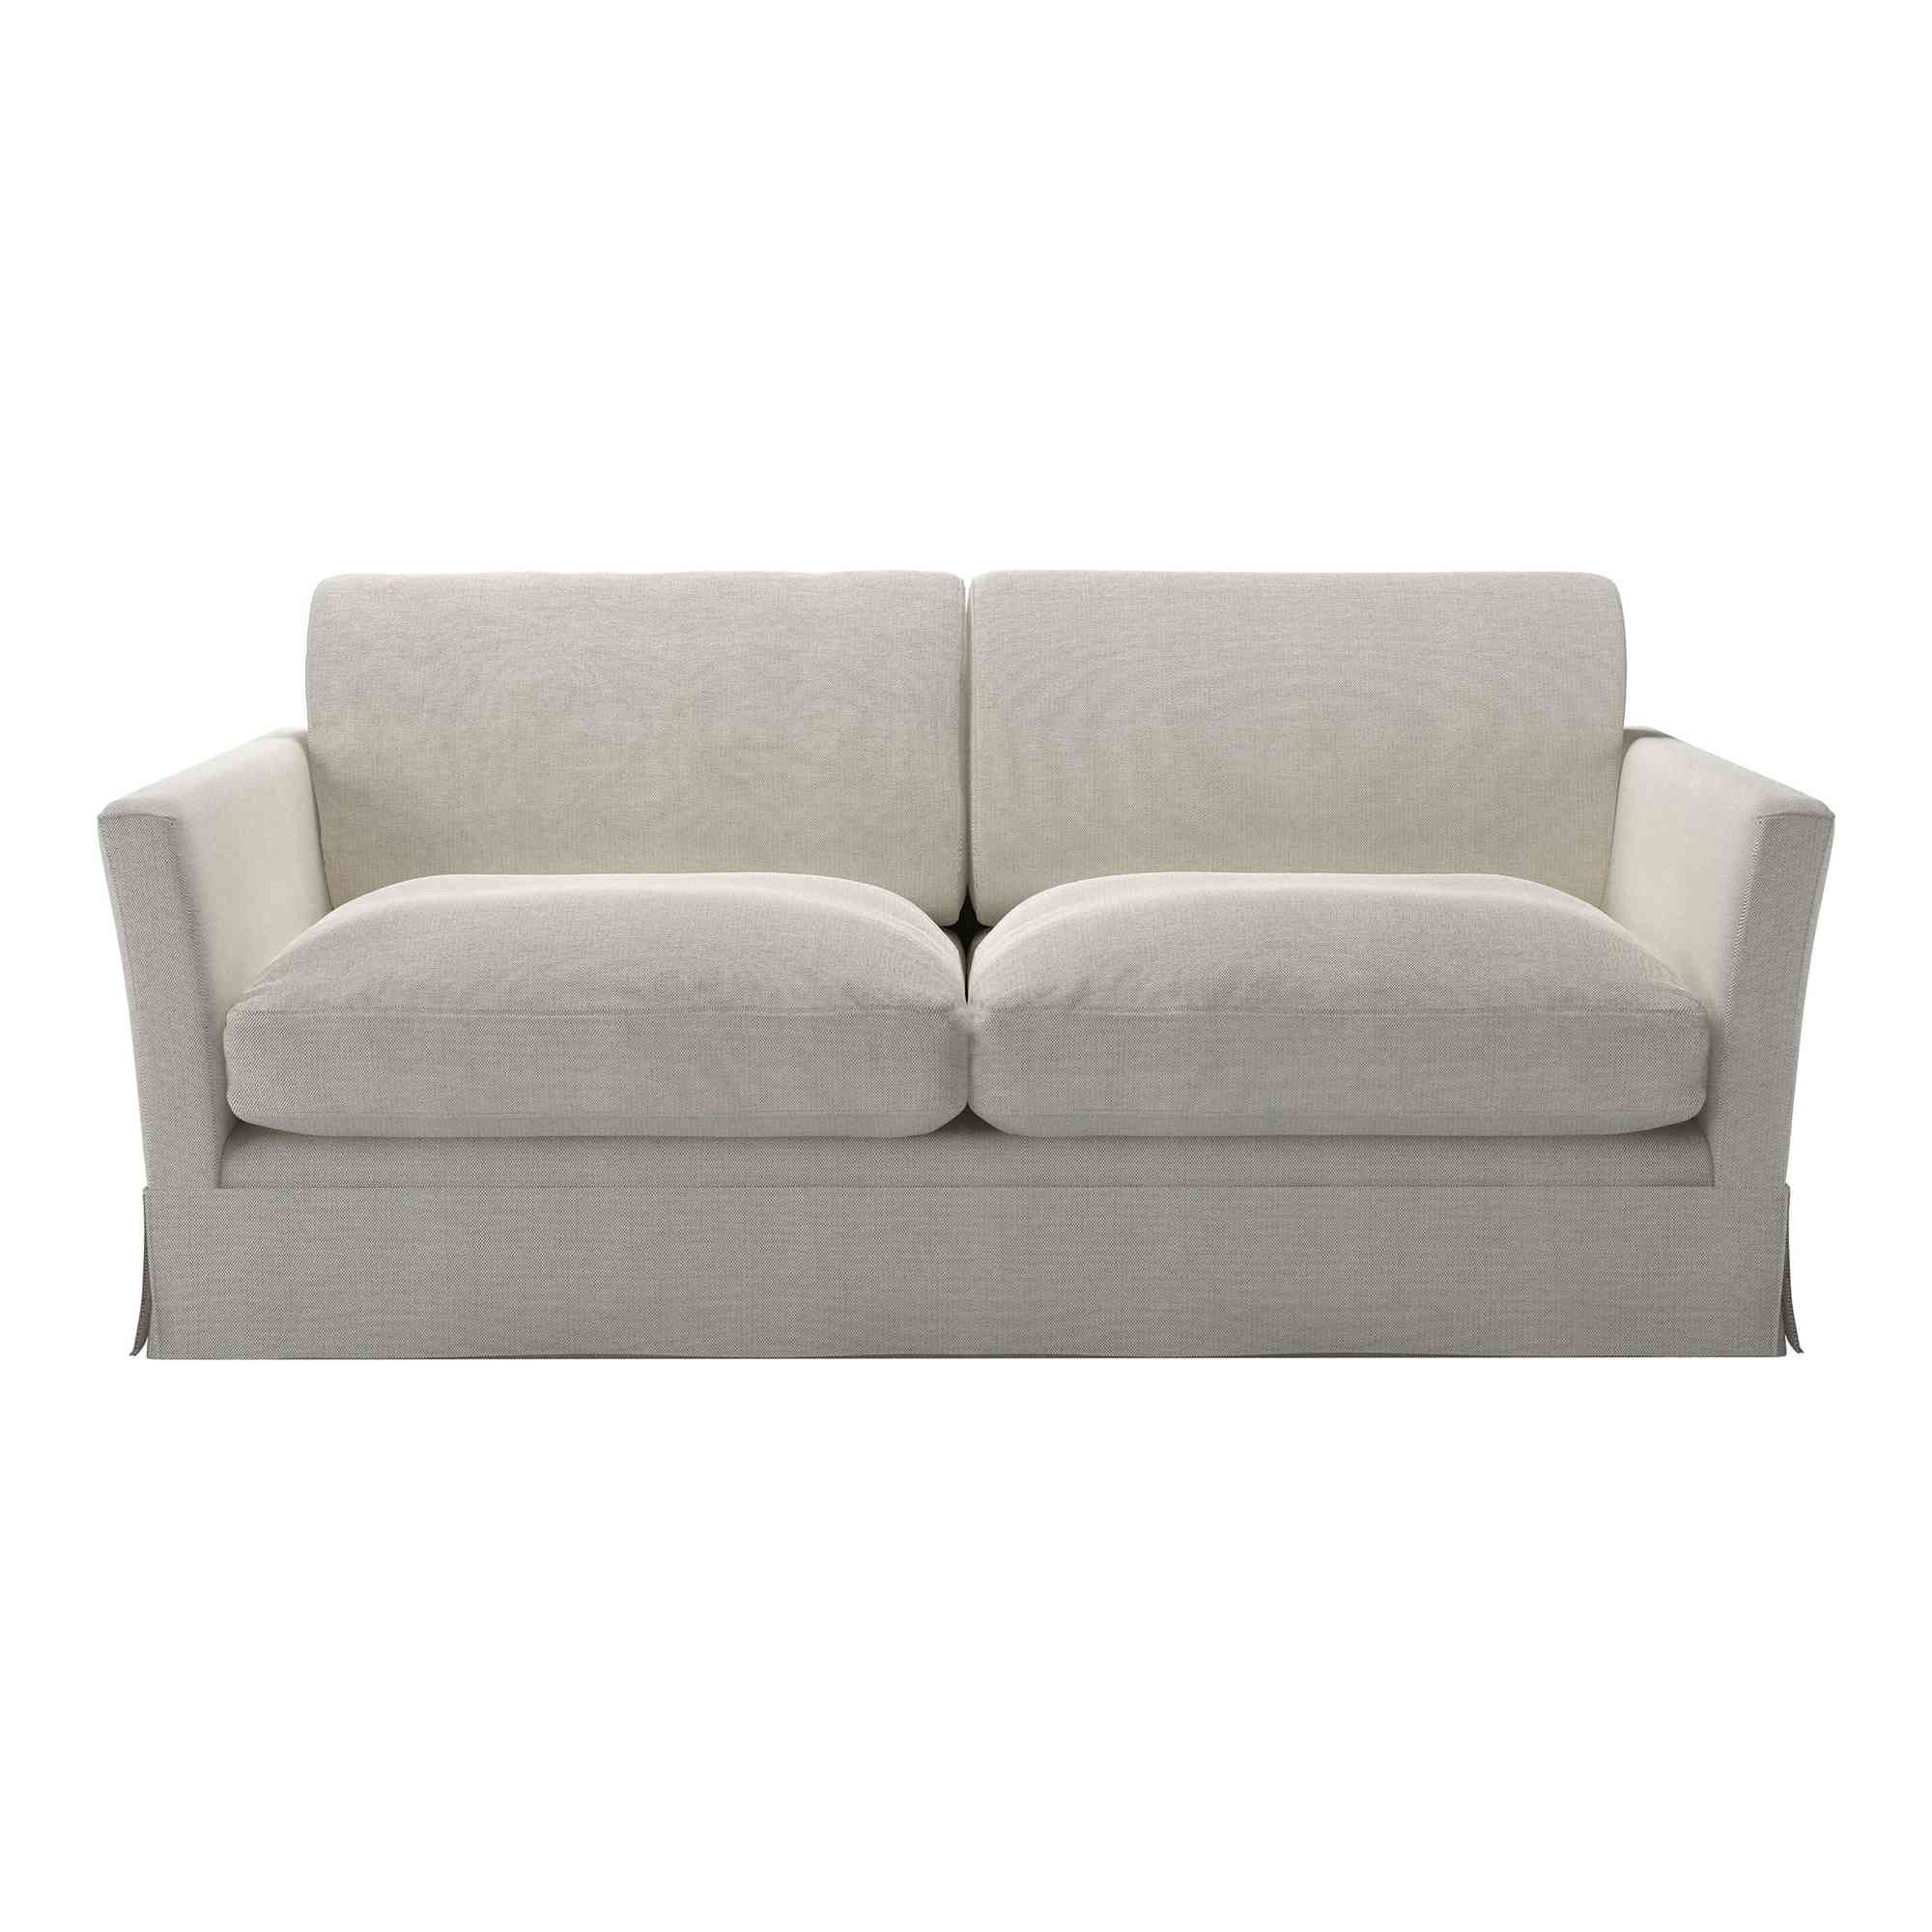 Otto Clay House Basket Weave Sofa - 2.5 Seater